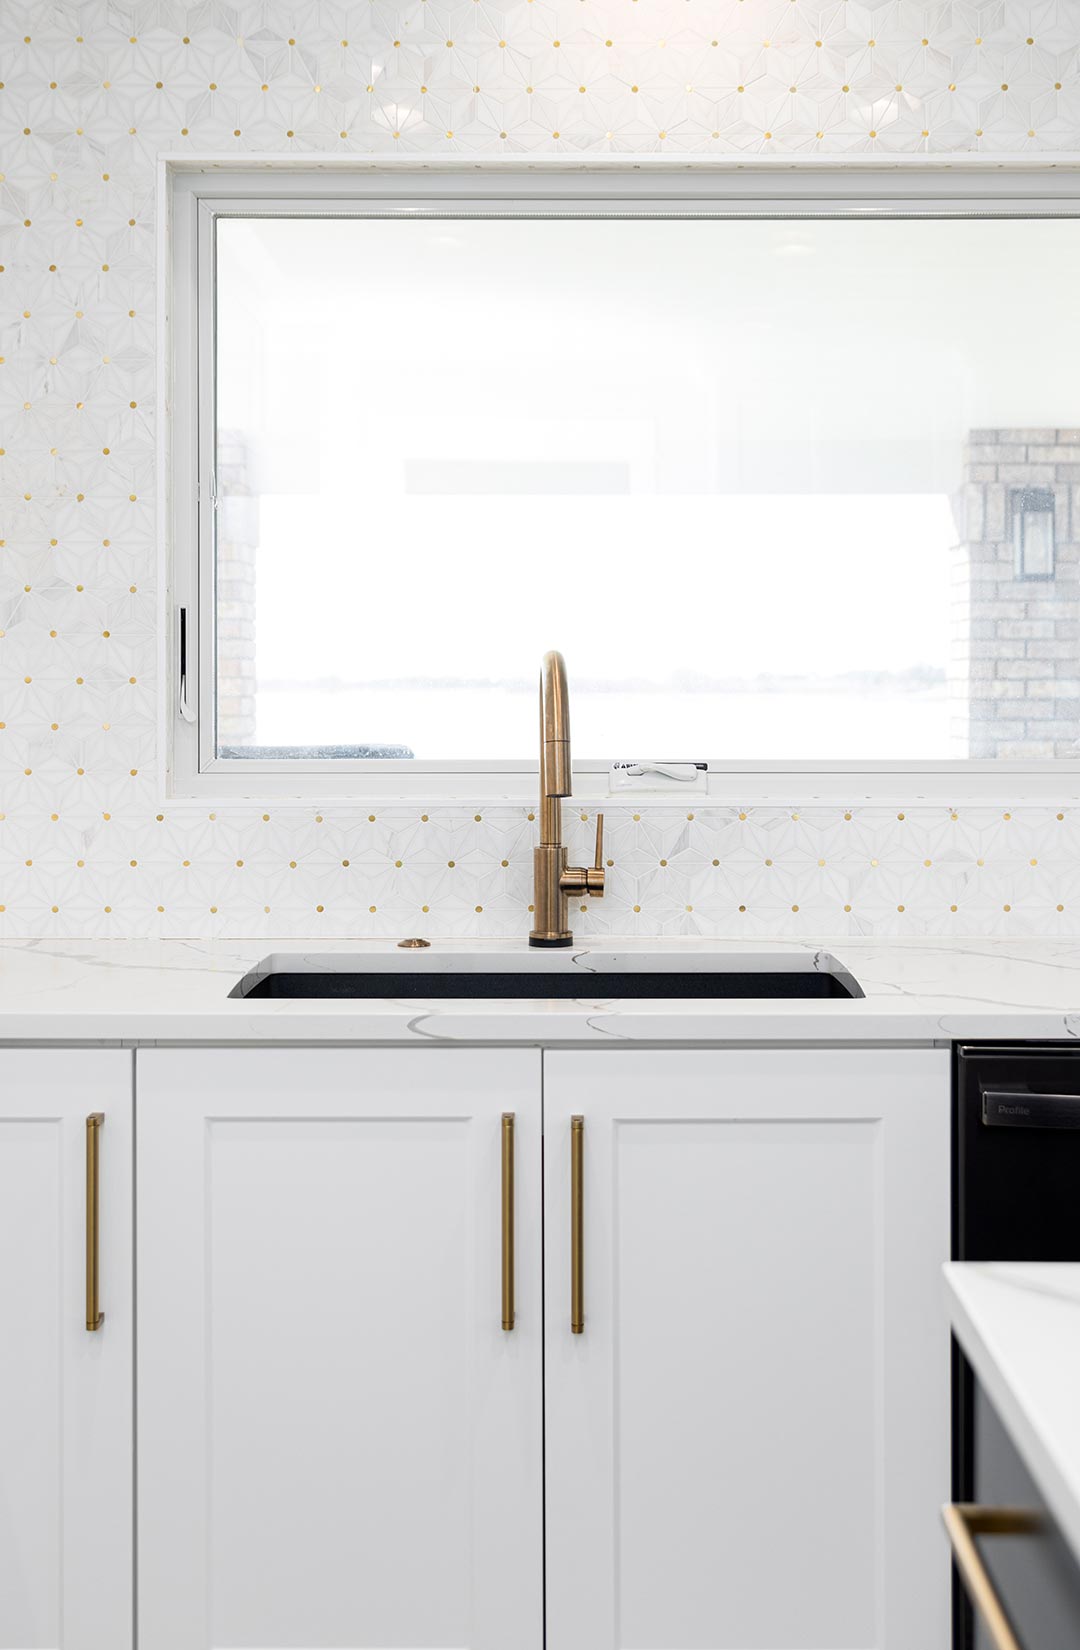 The sink of Janna Drive's kitchen showing a brass faucet under a large open window